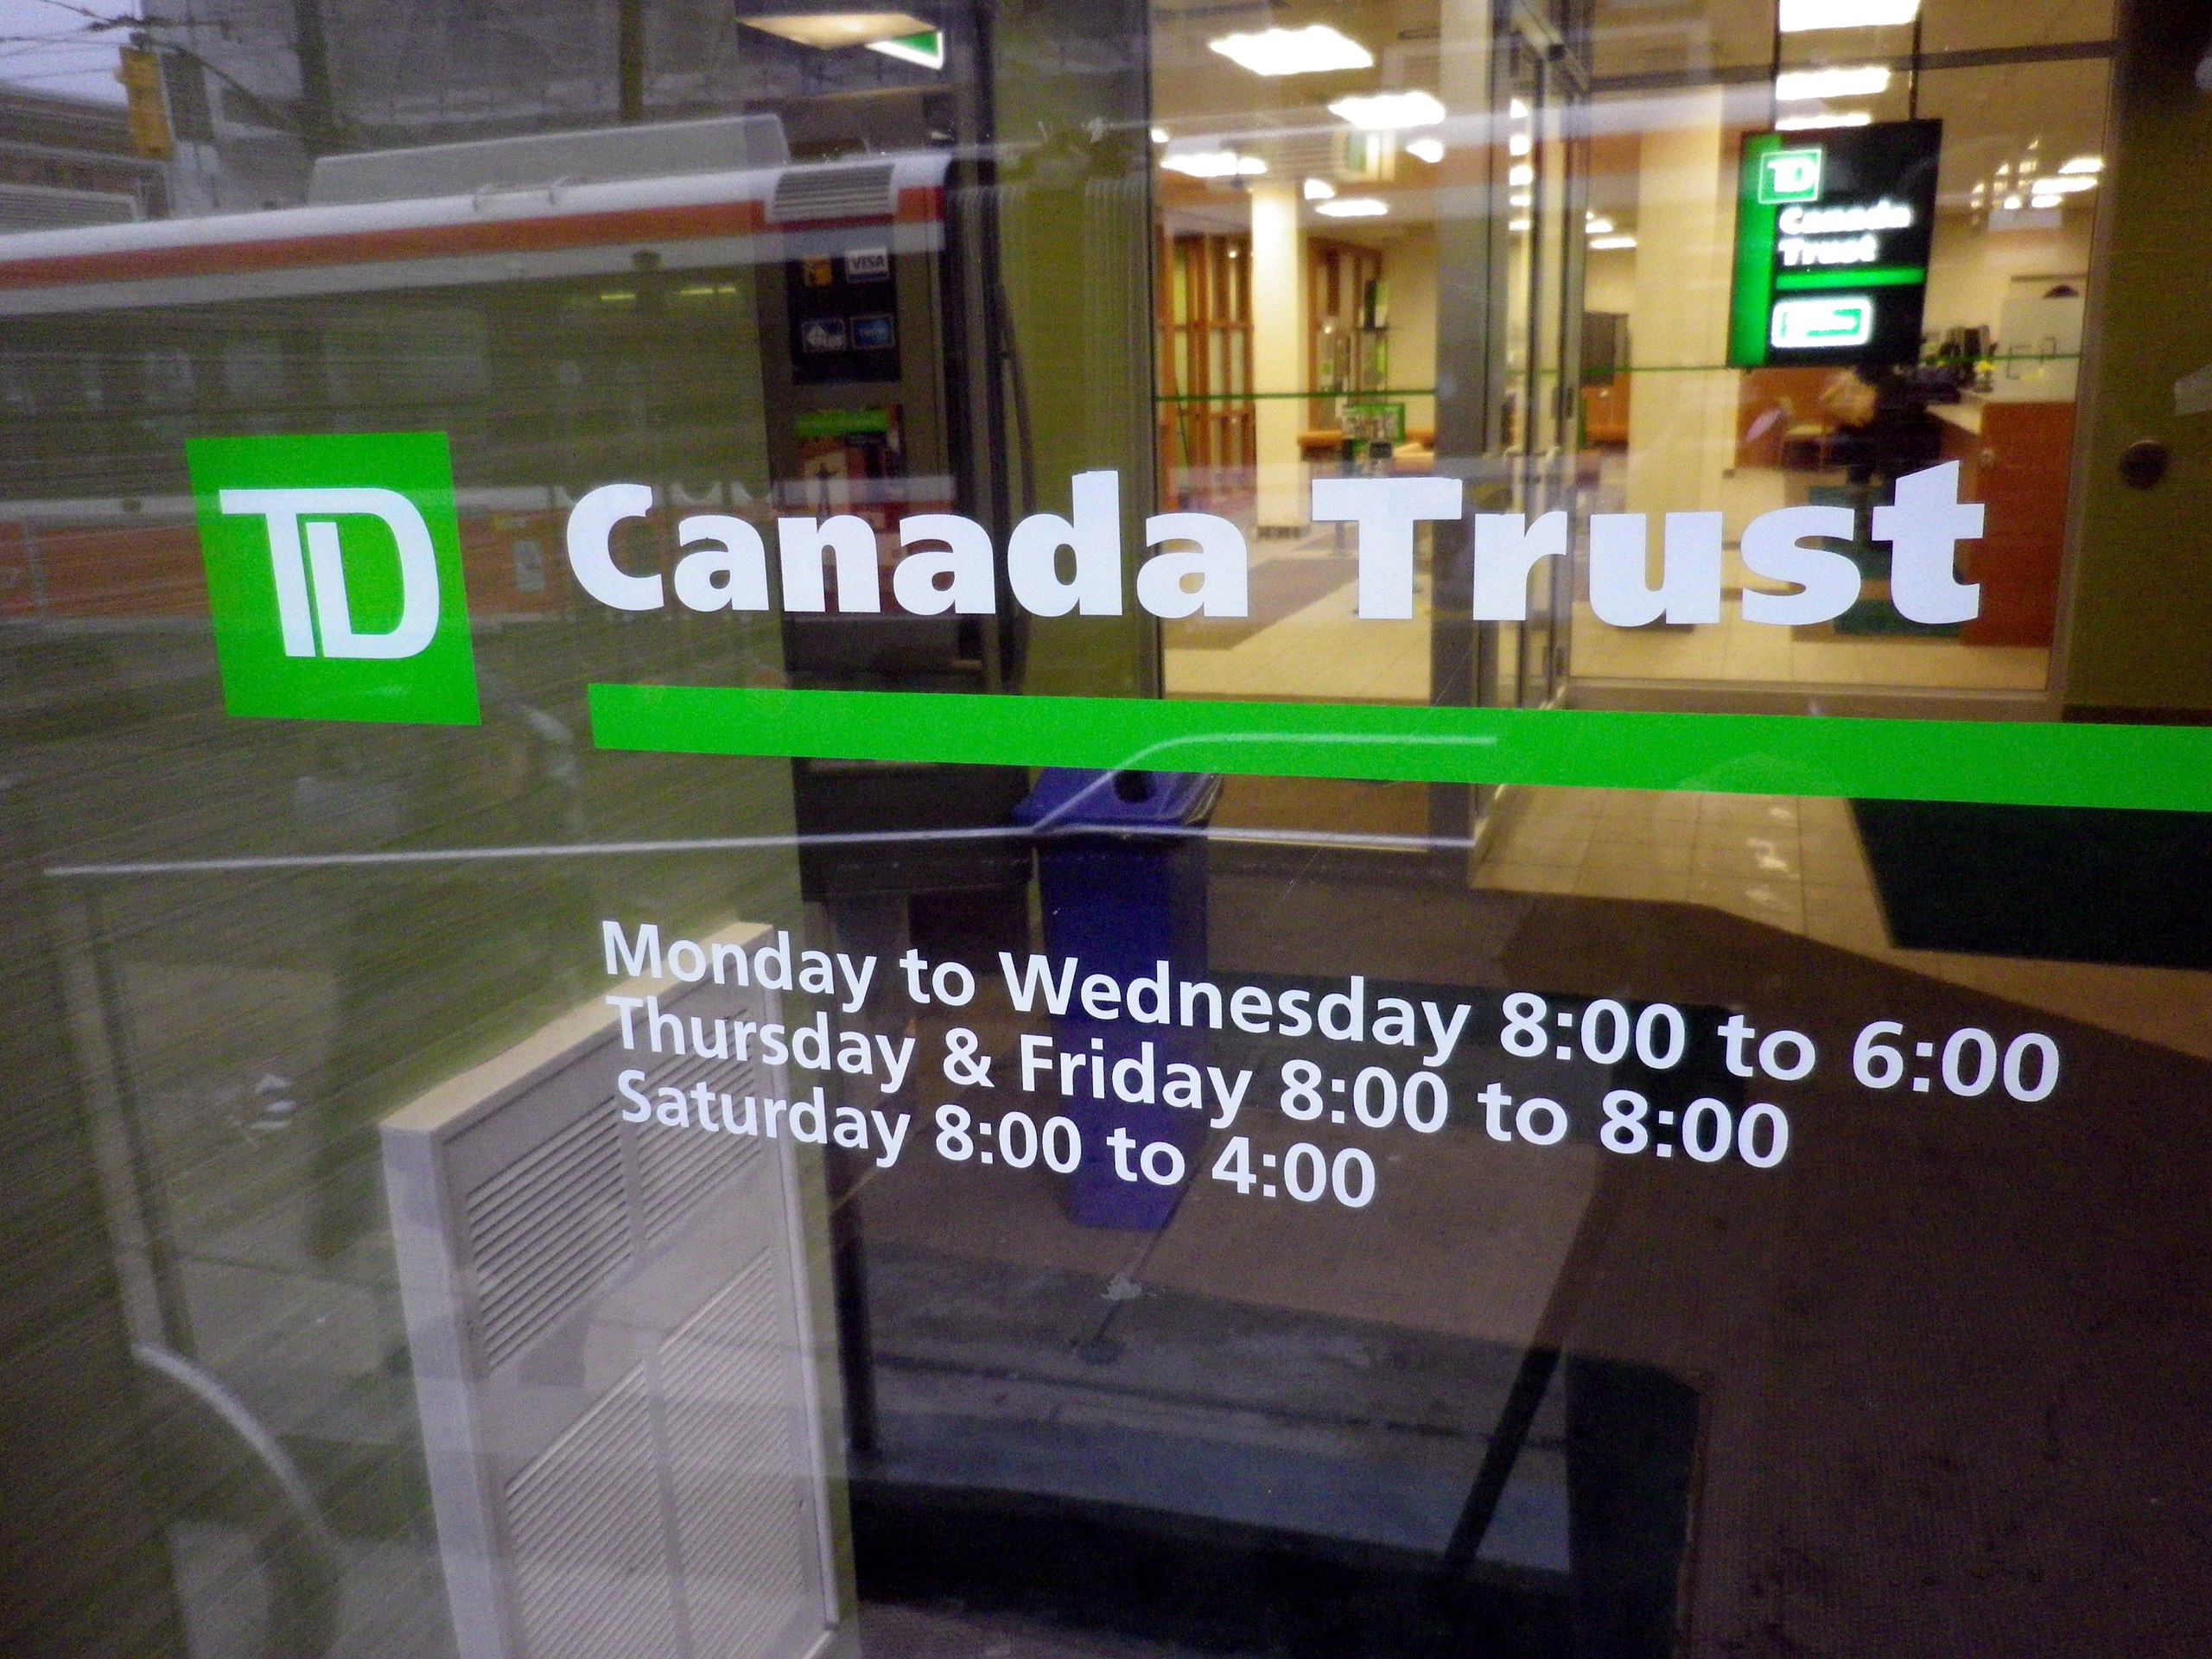 td canada trust hours